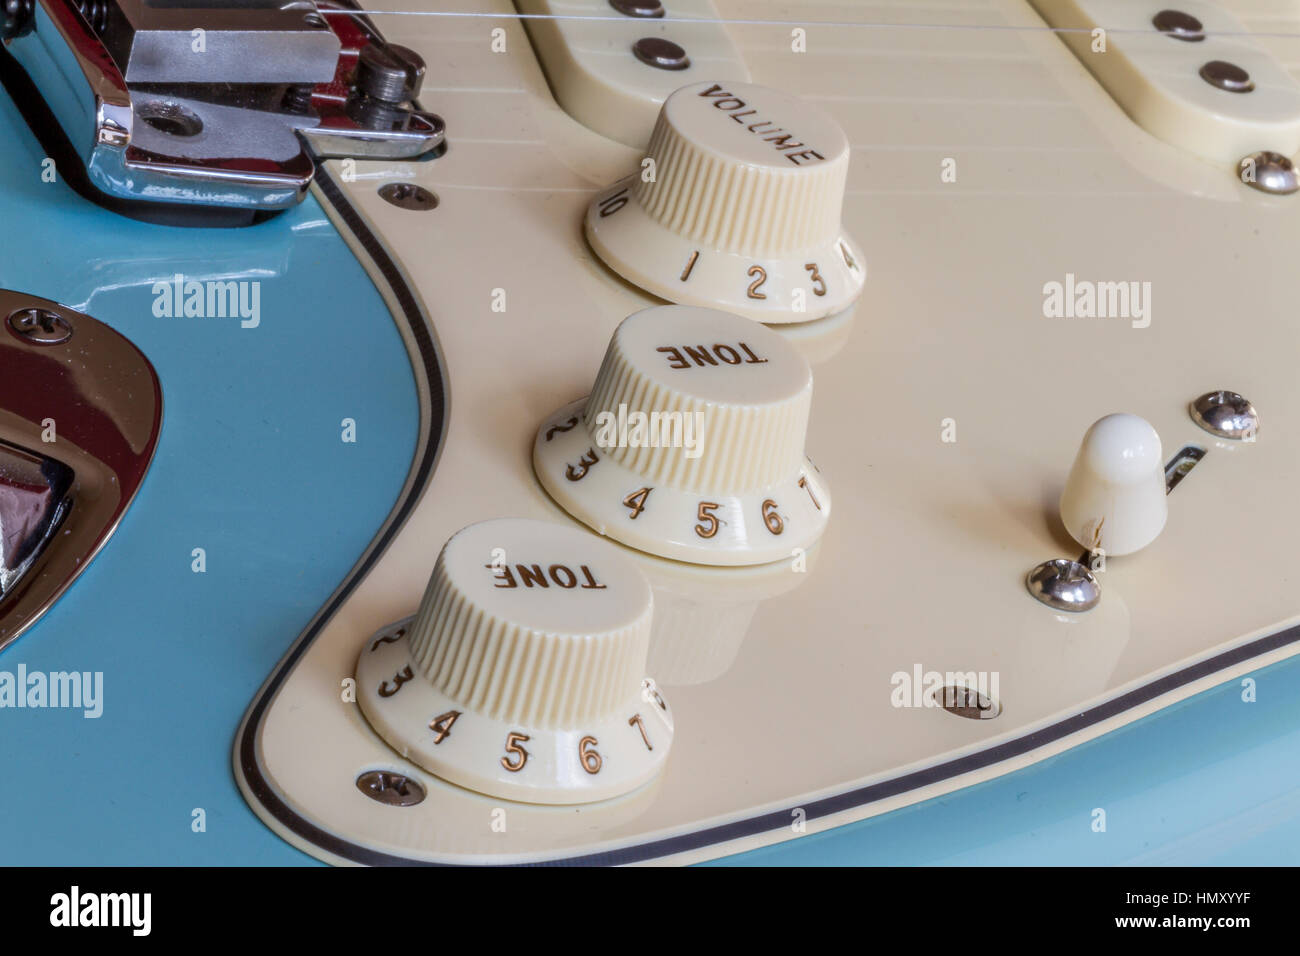 Close Up of a Fender Stratocaster electric guitar showing volume and tone  controls , bridge saddle, pick-ups and pole pieces nad pick up selector  Stock Photo - Alamy